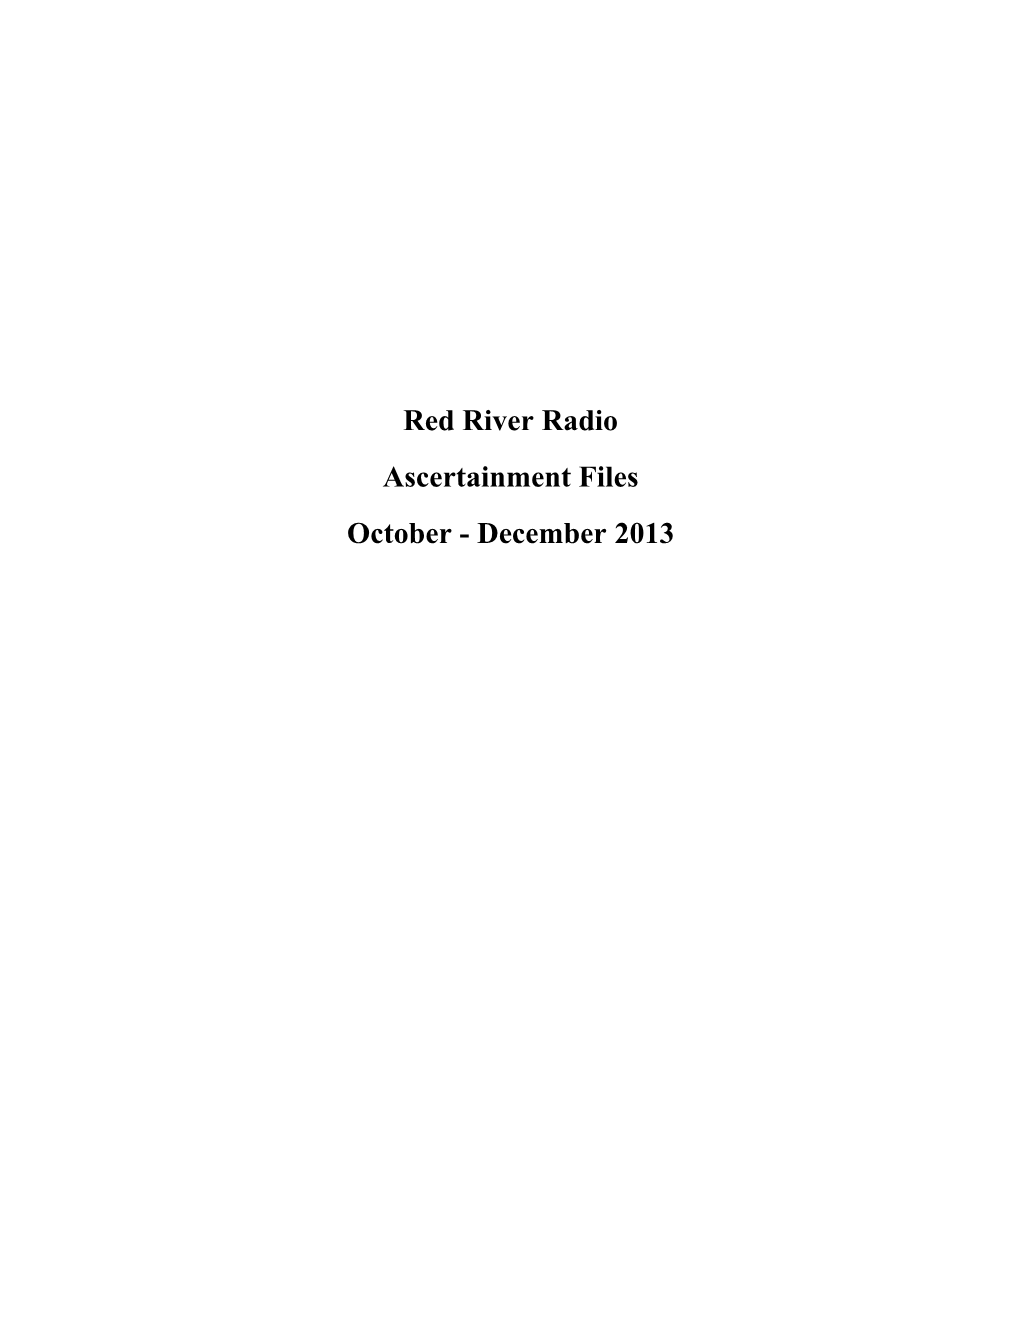 Red River Radio Ascertainment Files October - December 2013